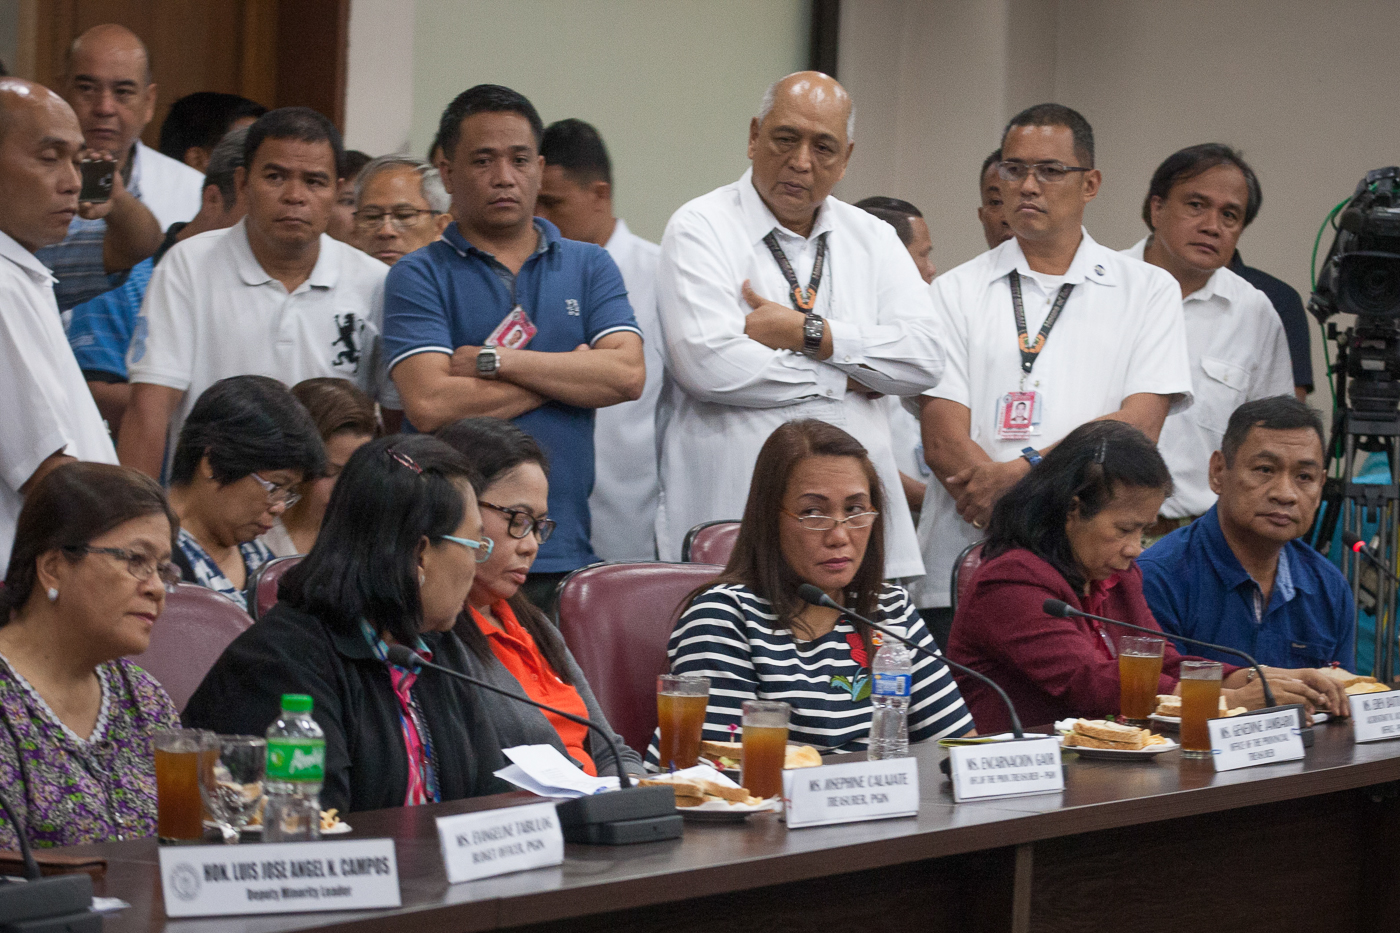 DETAINED OFFICIALS. (L-R) Evangeline Tabulog, Josephine Calajate, Encarnacion Gaor, Genedine Jambaro, Eden Battulayan, and Pedro Agcaoili during a House hearing on June 20, 2017, when they still refused to properly testify before lawmakers. Photo by Jasmin Dulay/Rappler 